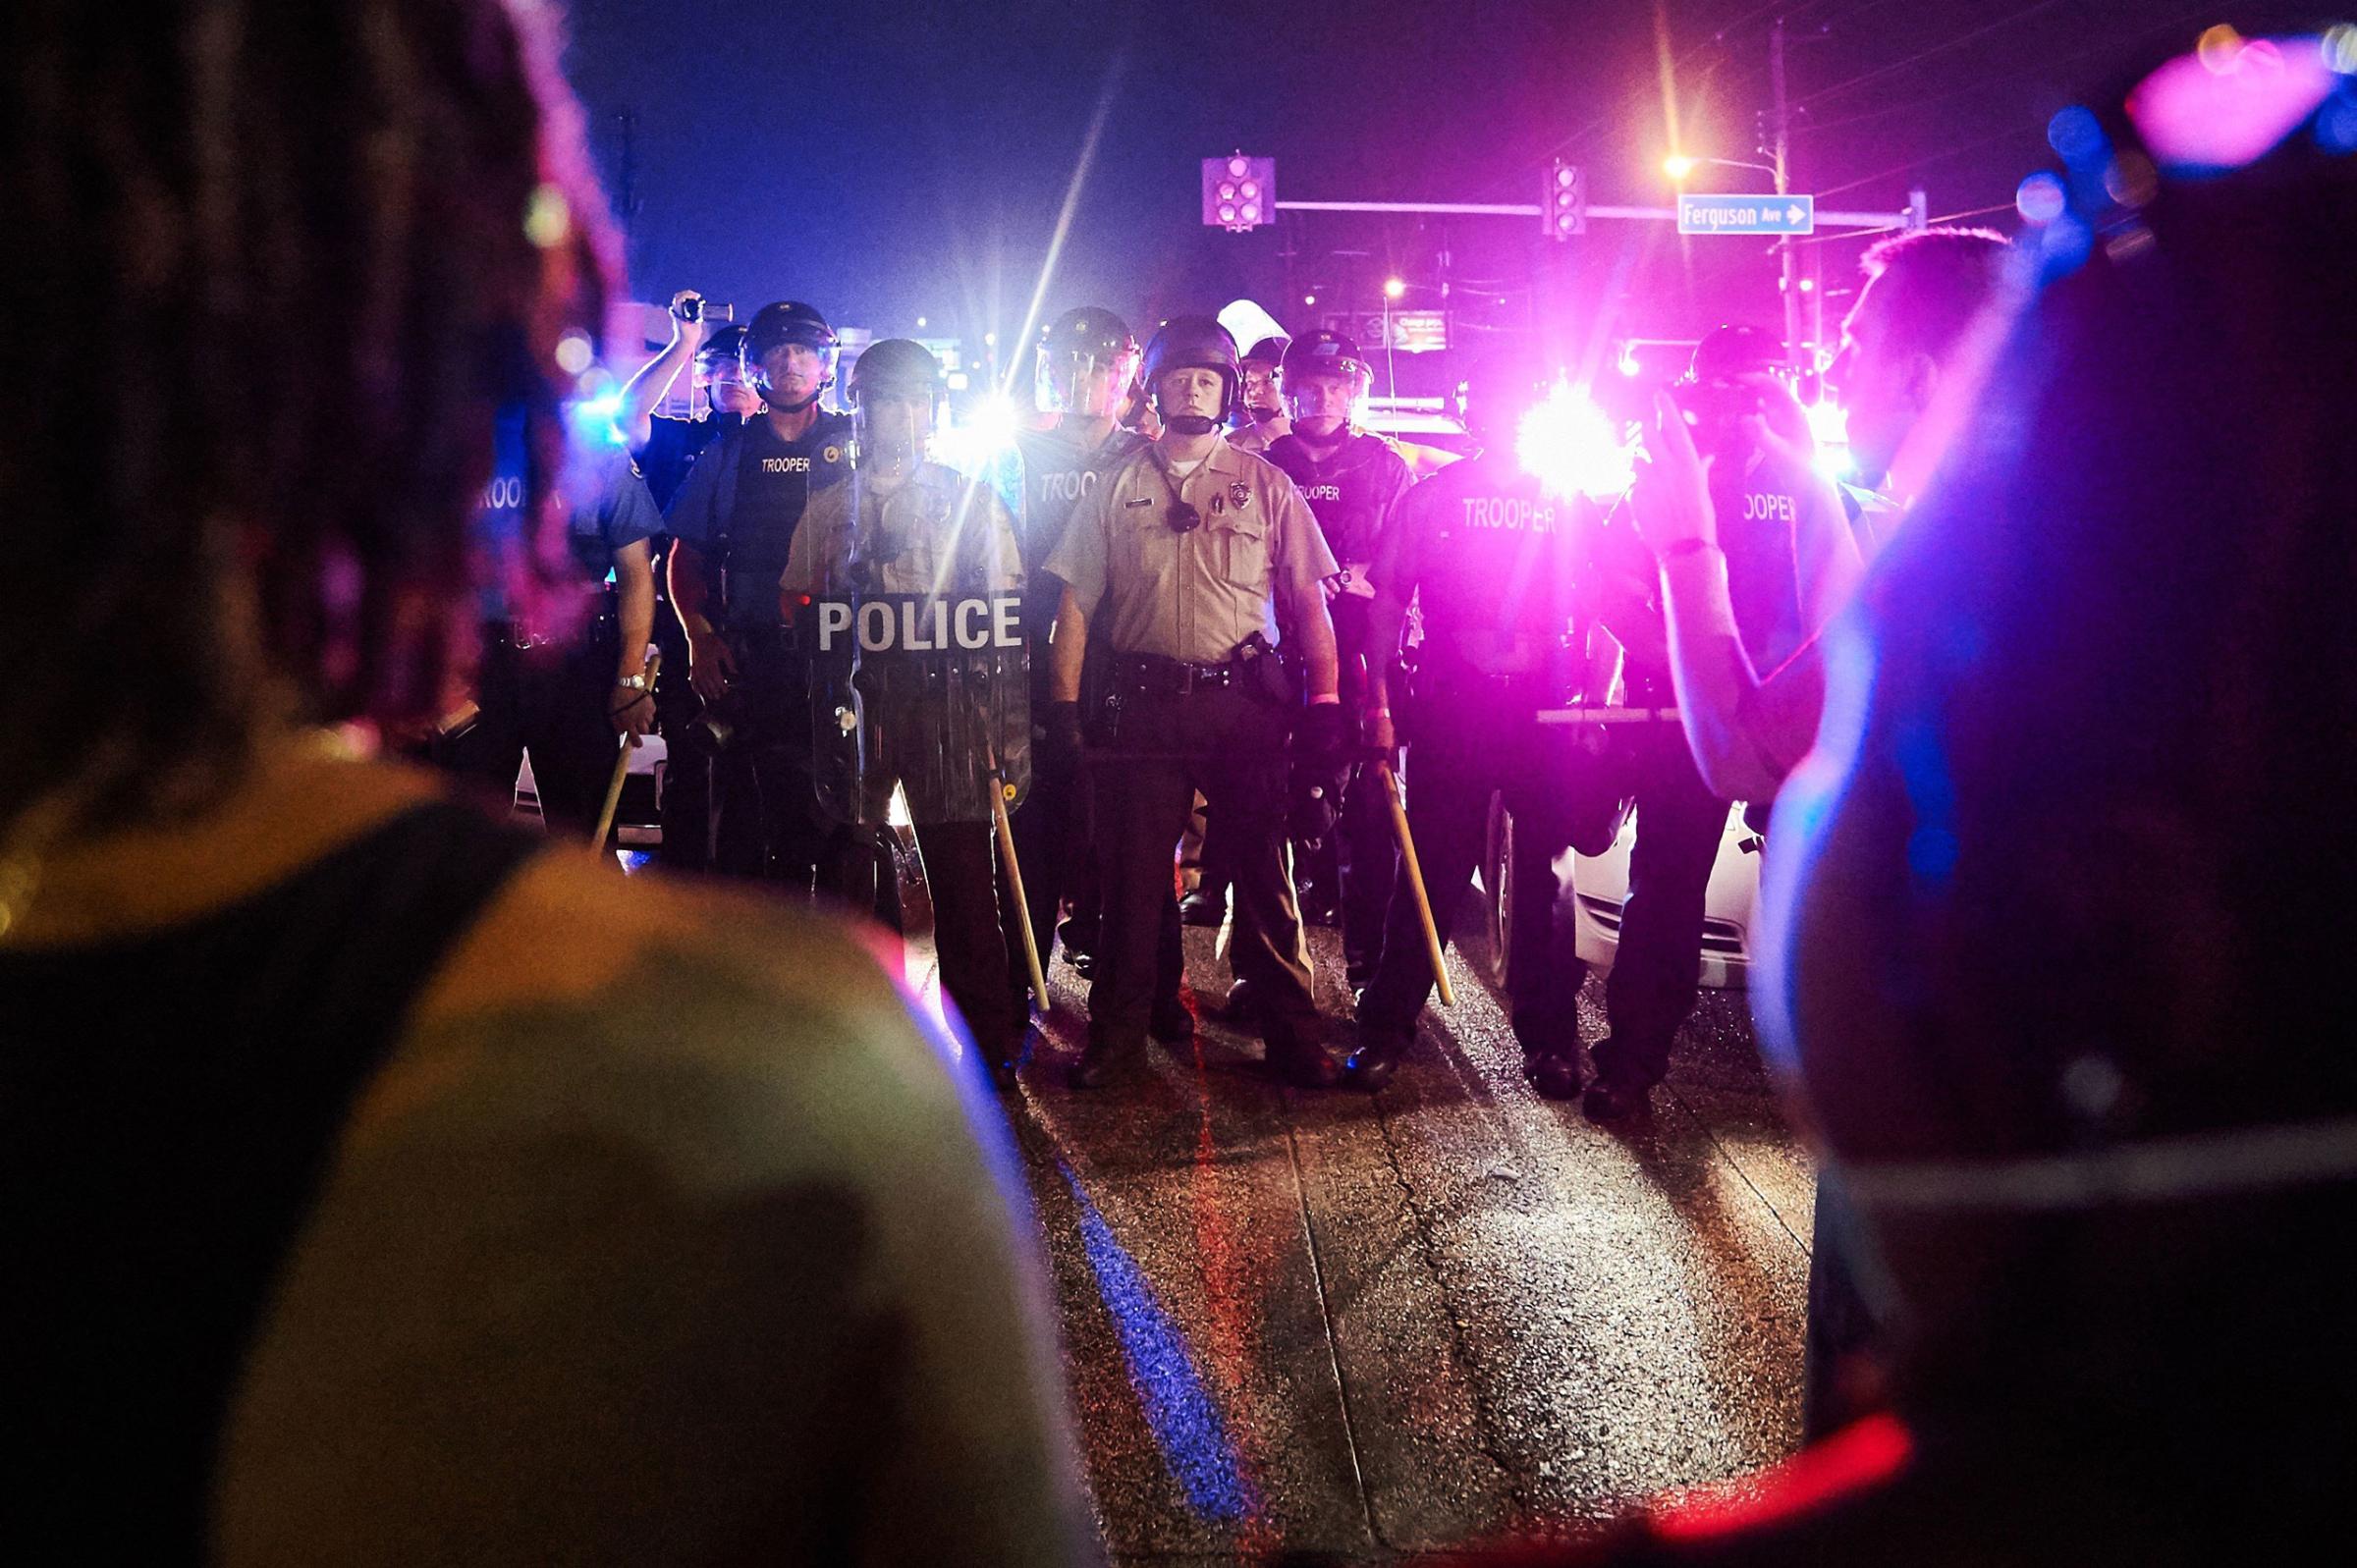 St. Louis County Police and Missouri State Highway Patrol troopers (C) stand guard as protesters (foreground) march on West Florissant Avenue in Ferguson, Missouri on August 9, 2015. A day of peaceful remembrance marking the anniversary of 18-year-old black teen Michael Brown's killing by police in the US city of Ferguson came to a violent end on August 9 as gunfire left at least one protester injured. AFP PHOTO / MICHAEL B. THOMASMichael B. Thomas/AFP/Getty Images